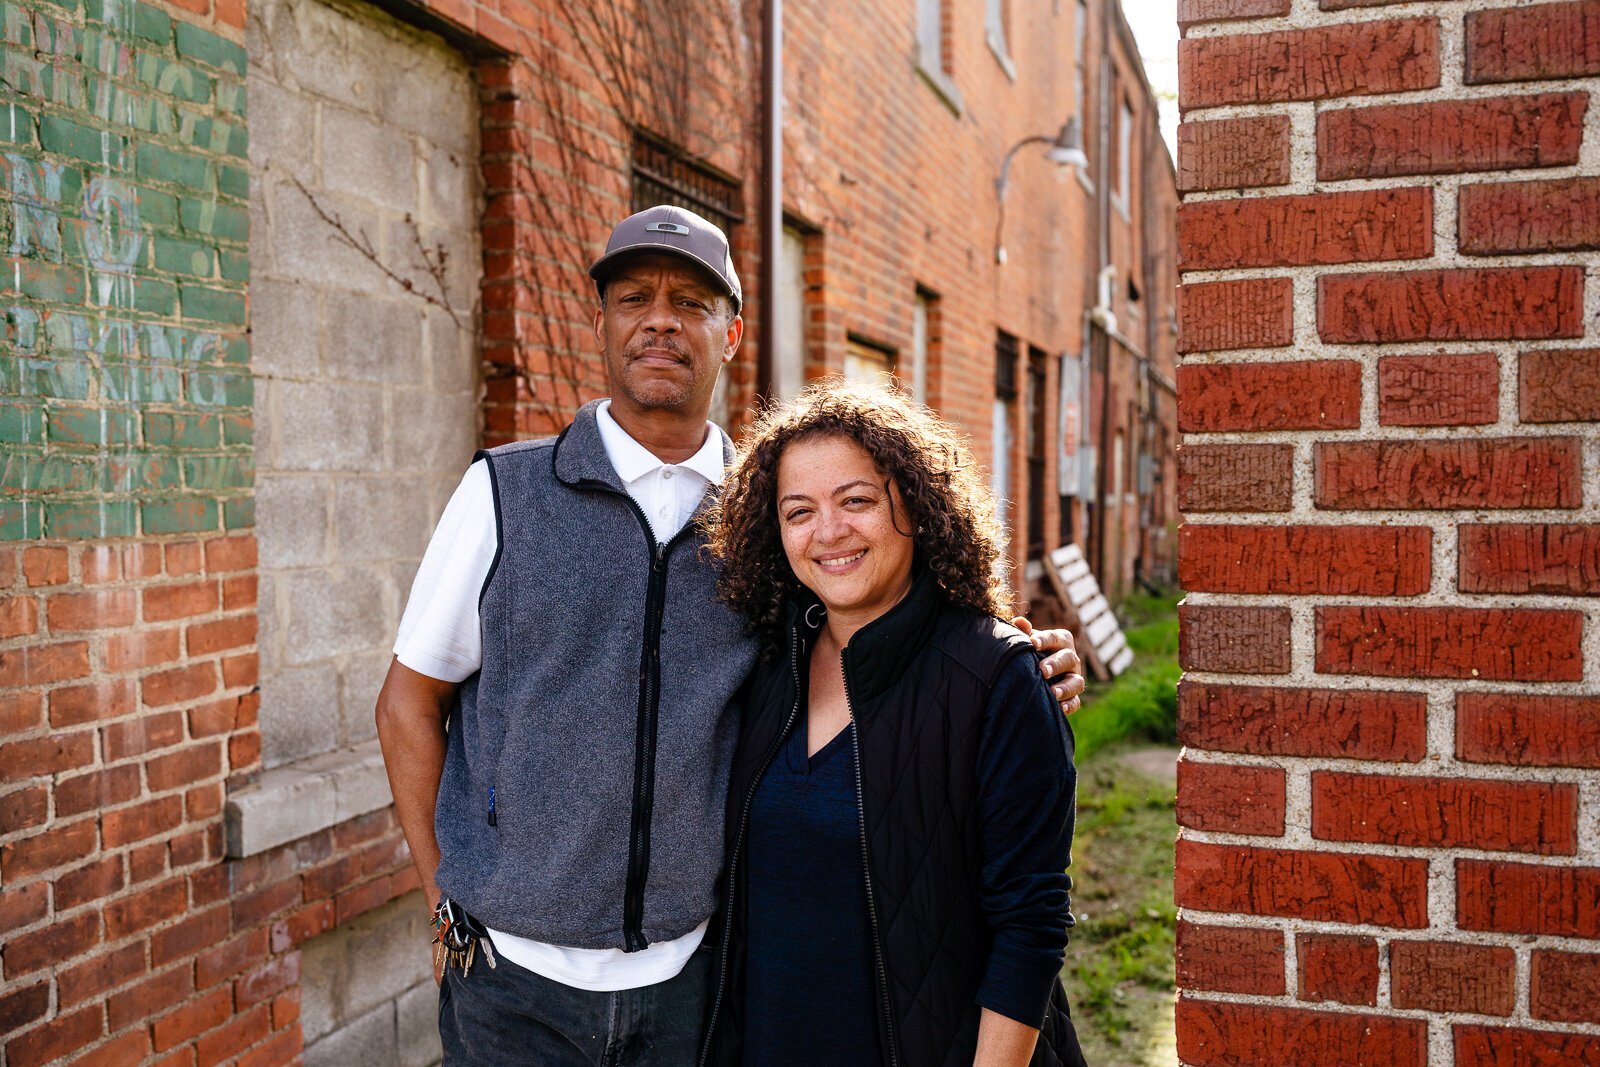 Detroiters Stephen Merriweather (left) and Sharnita Johnson aim to build intergenerational wealth in their families and communities. Photo by Nick Hagen.